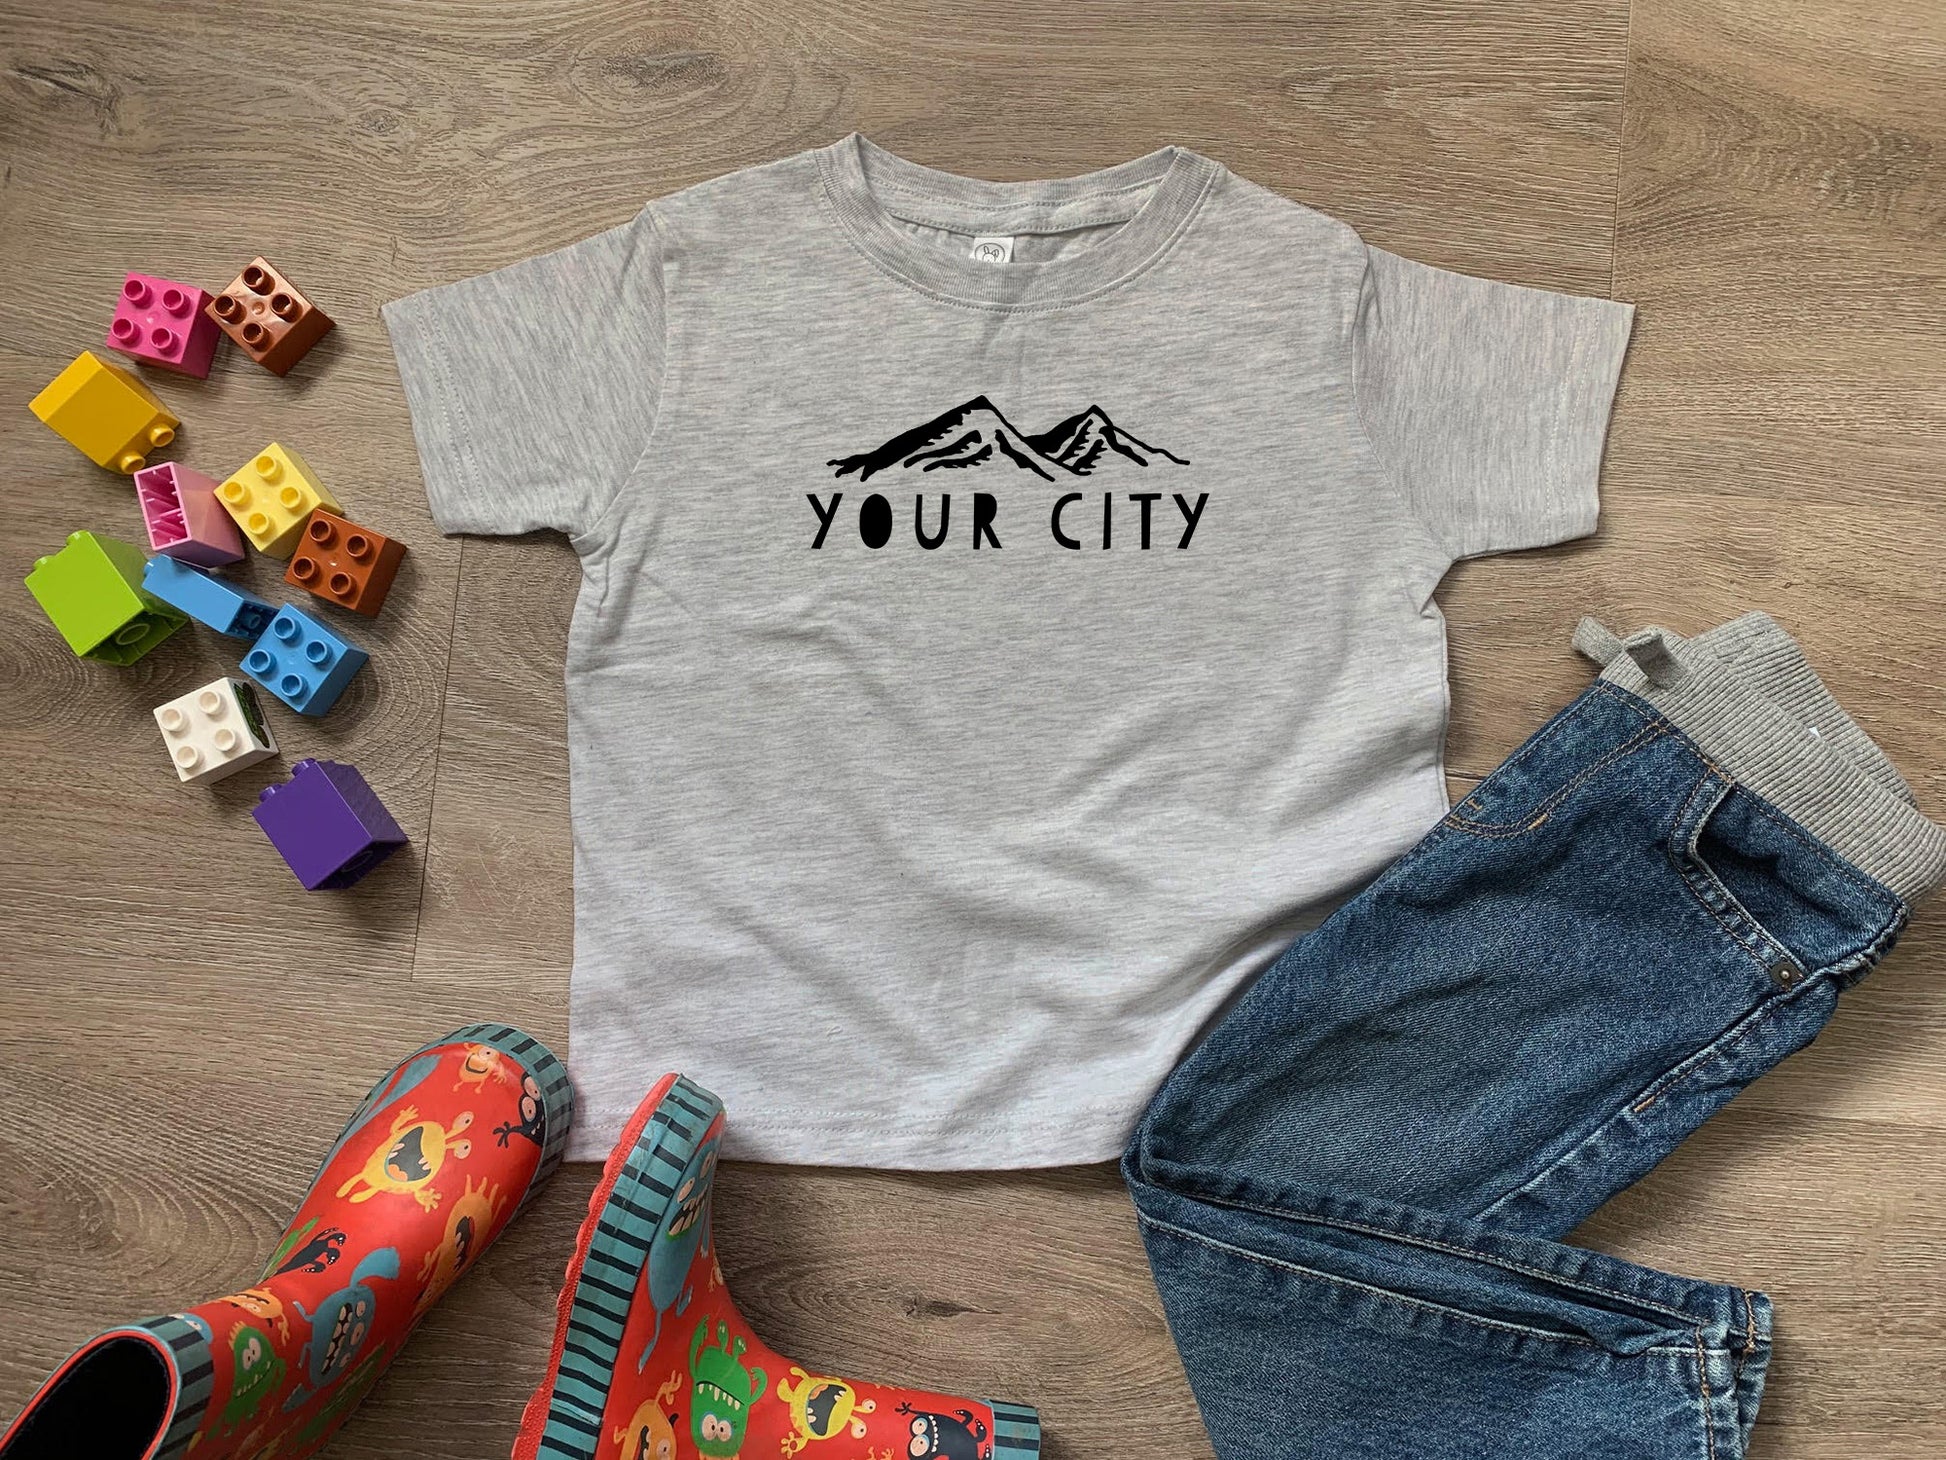 a t - shirt that says your city next to a pair of jeans and rubber